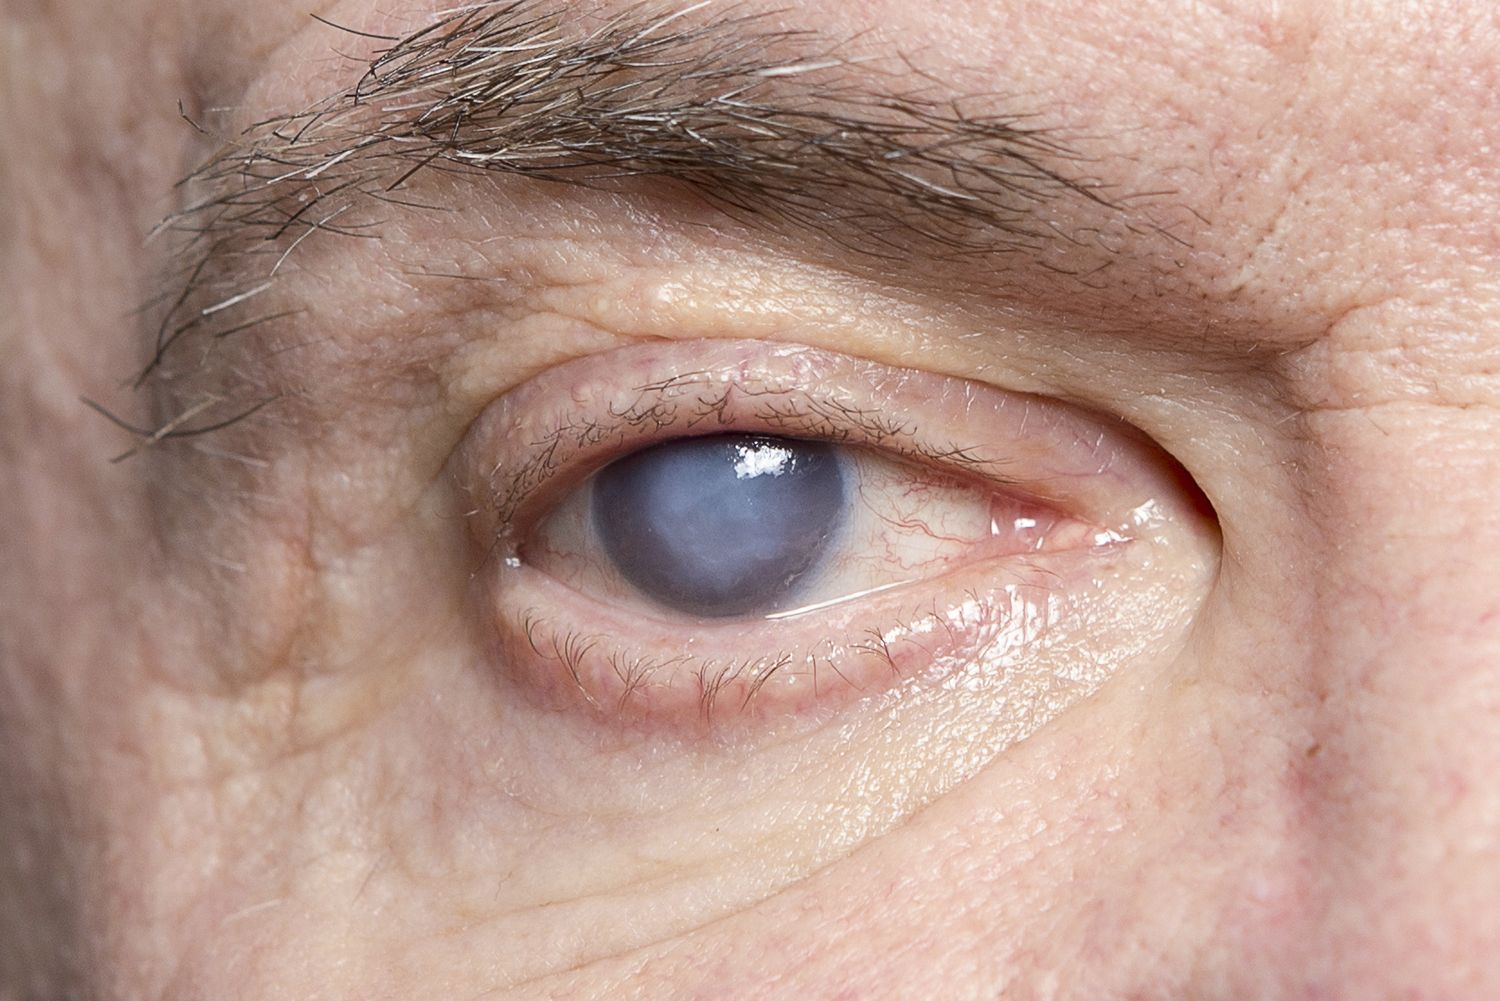 How to recover quickly from cataract eye surgery